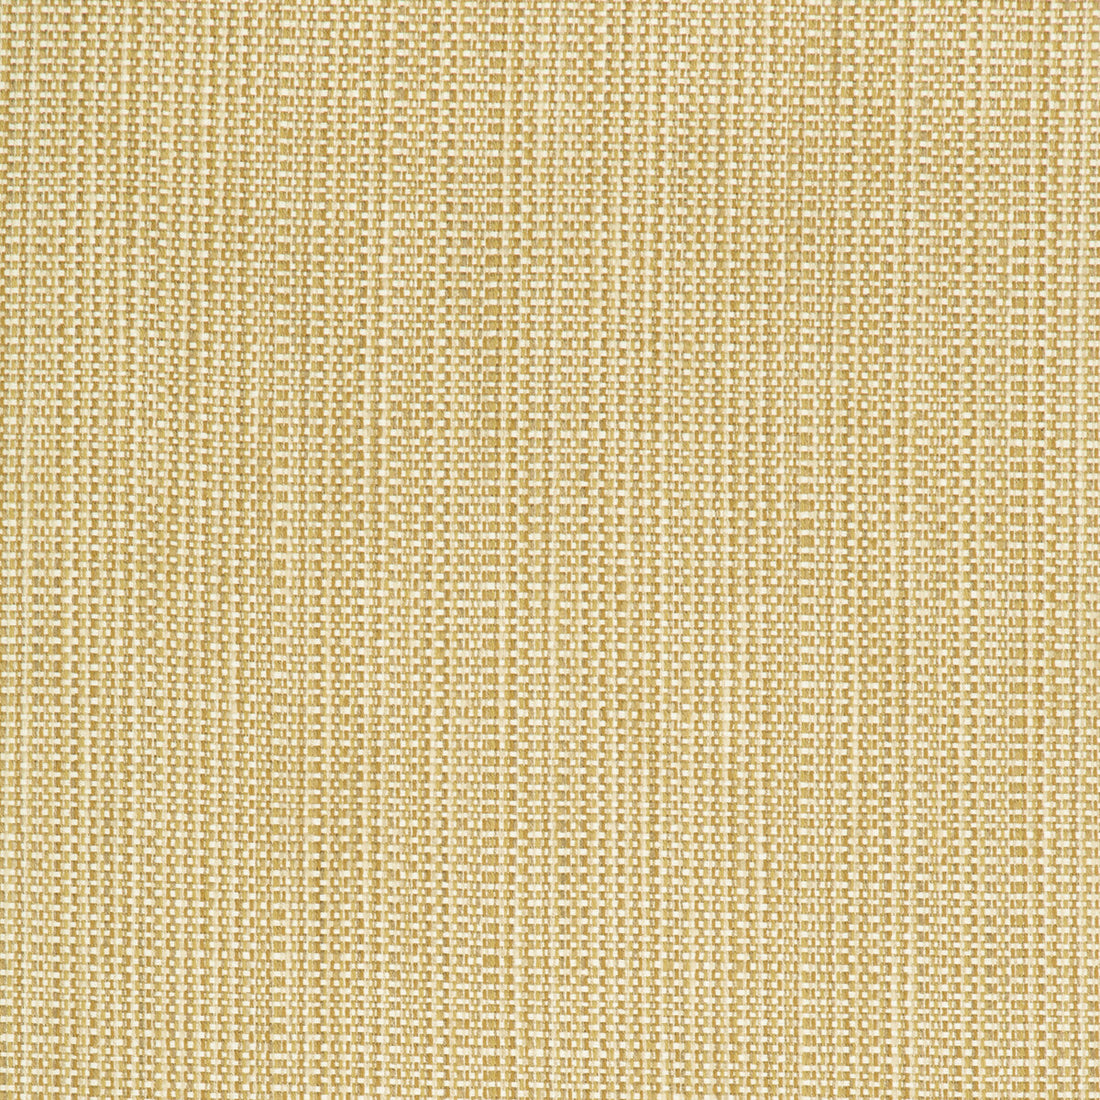 Kravet Contract fabric in 34634-416 color - pattern 34634.416.0 - by Kravet Contract in the Crypton Incase collection